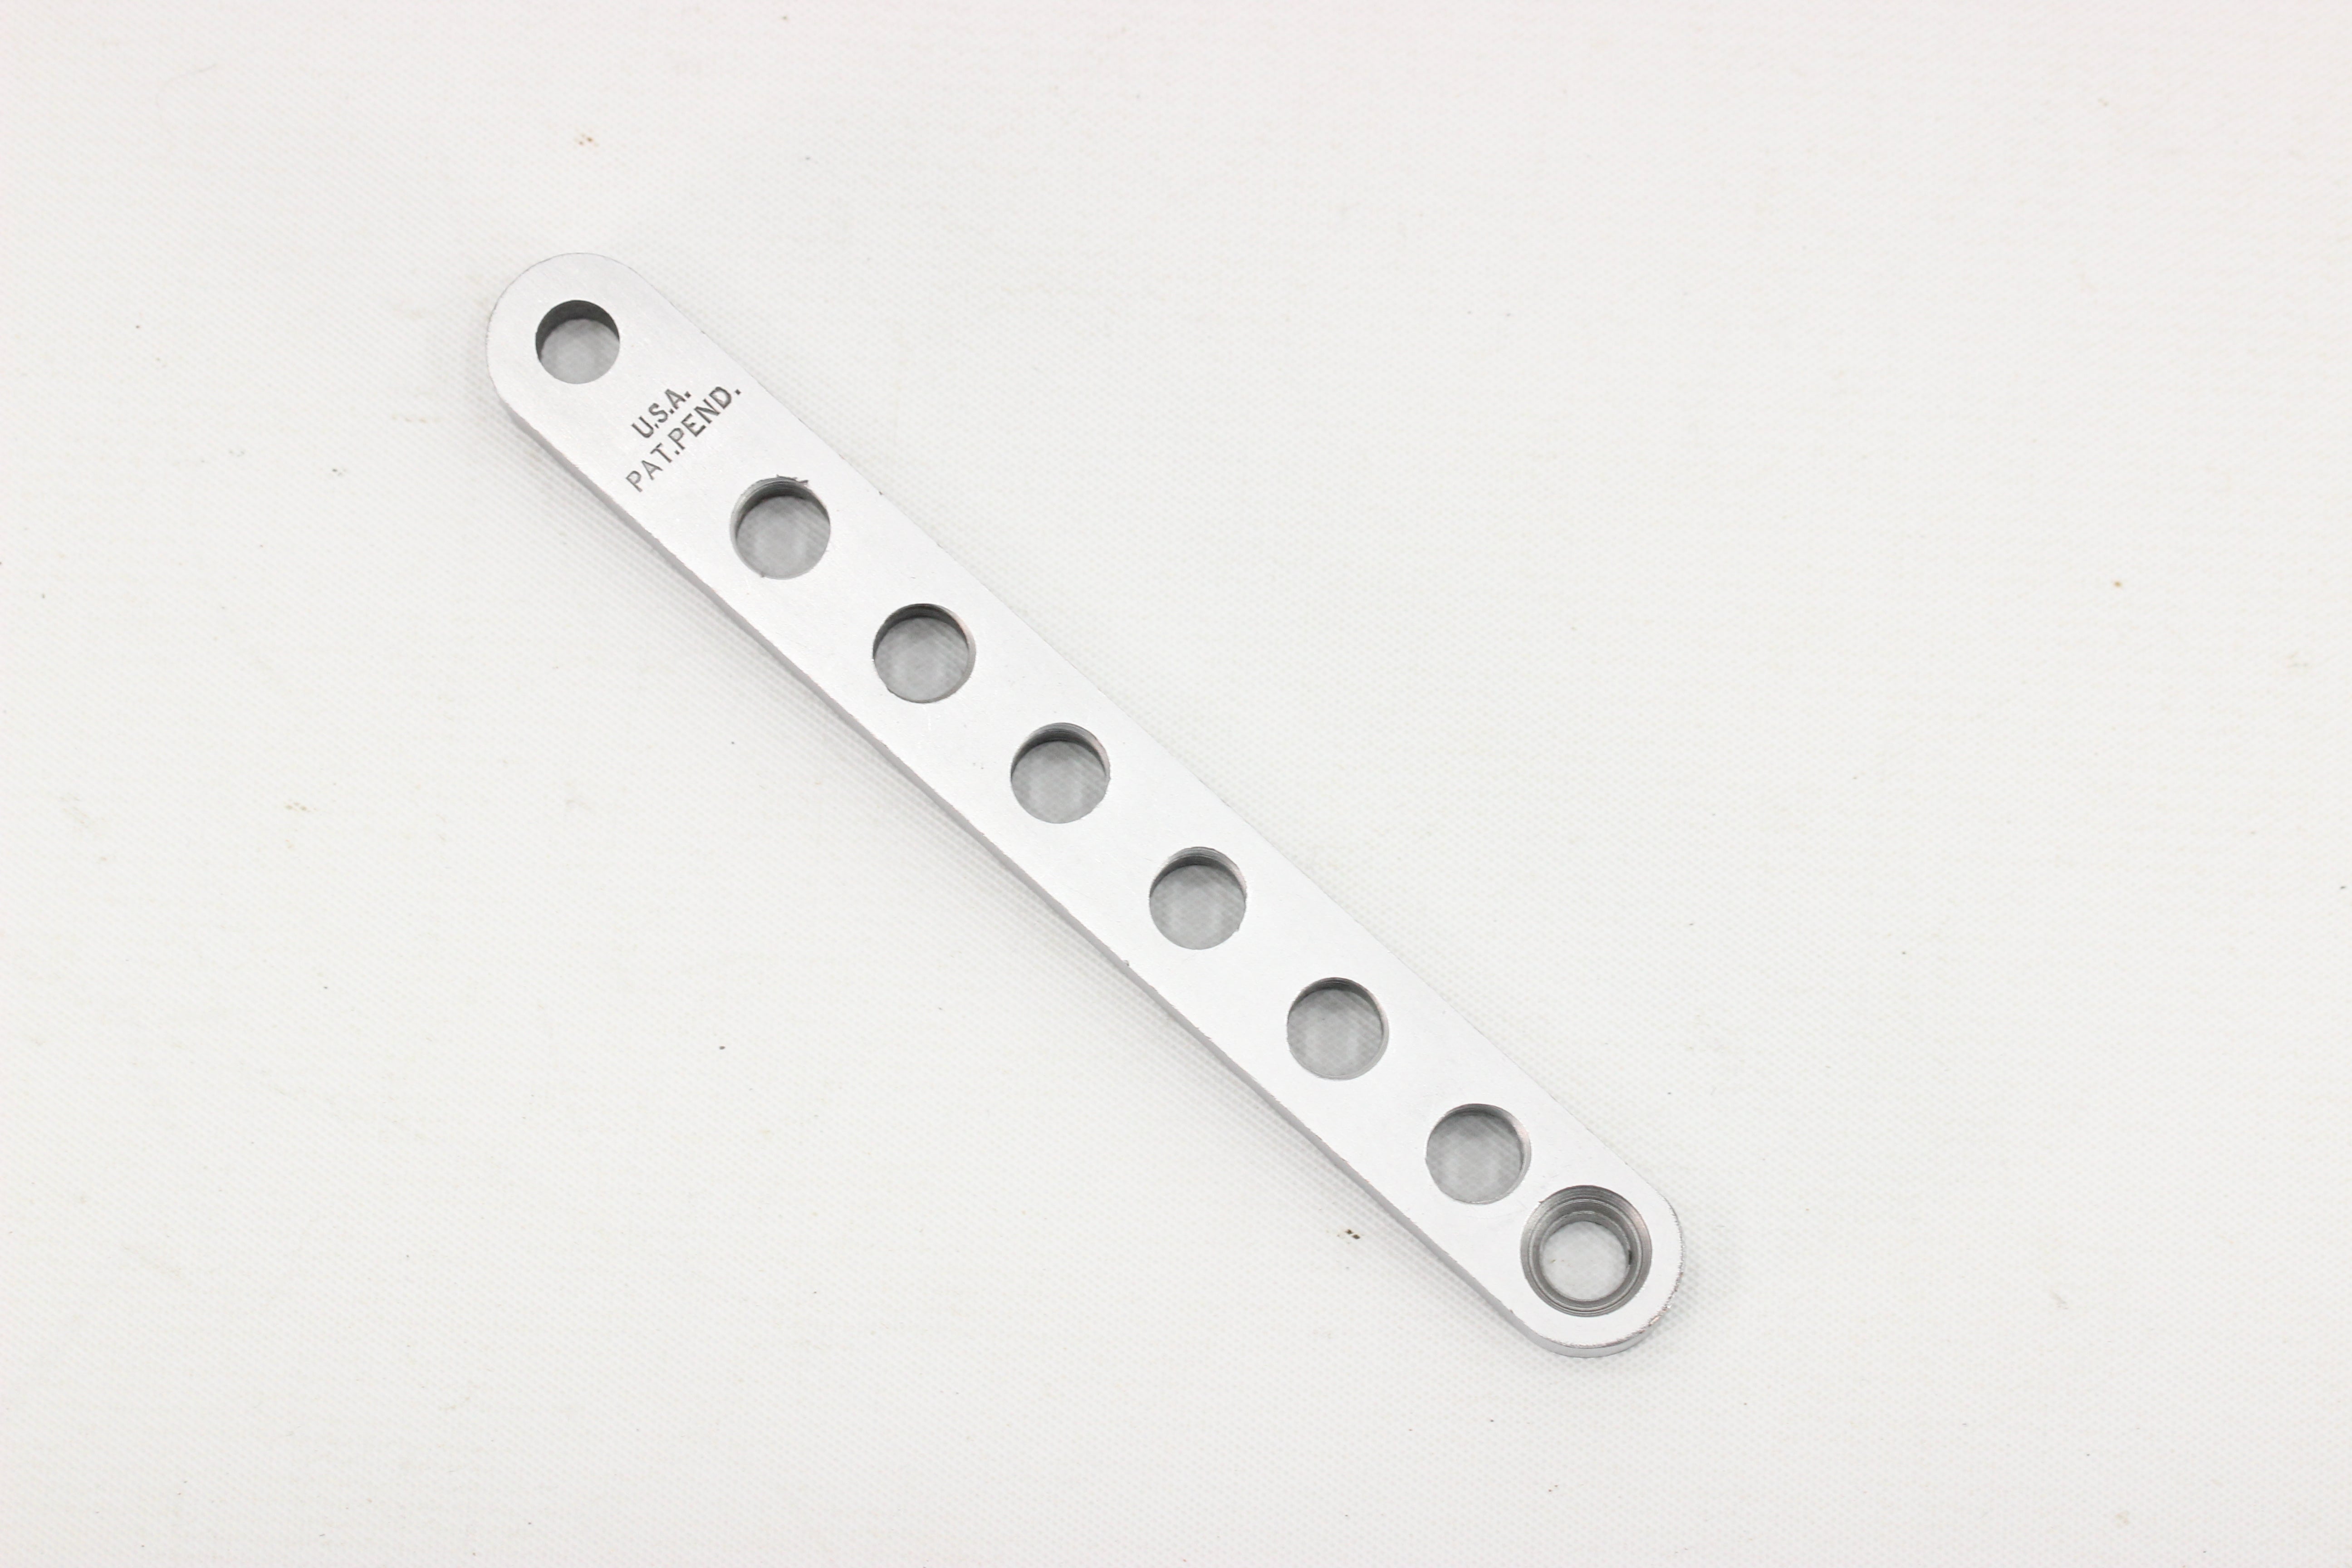 Target Rifle Forearm Adjustment Base - In the White